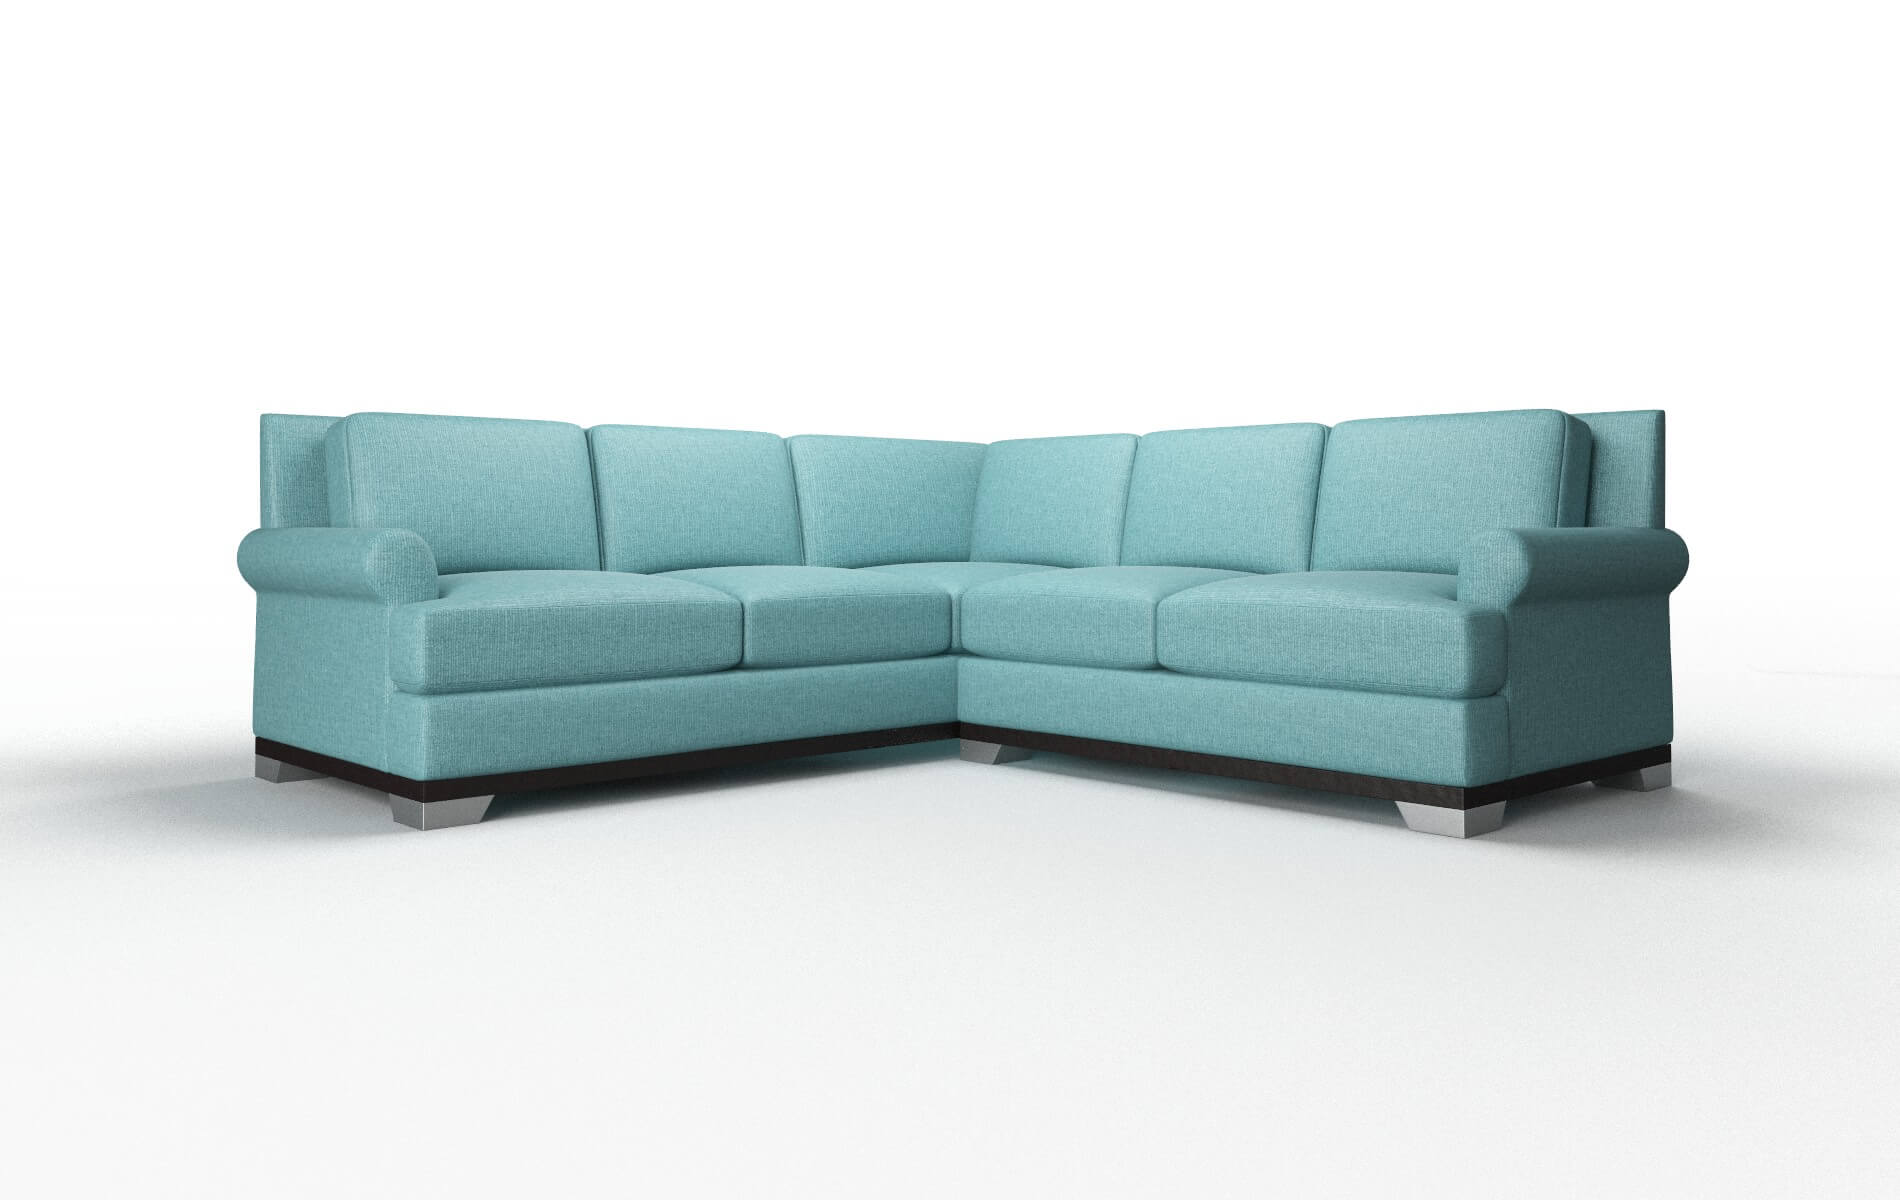 Newyork Parker Turquoise Sectional espresso legs 1